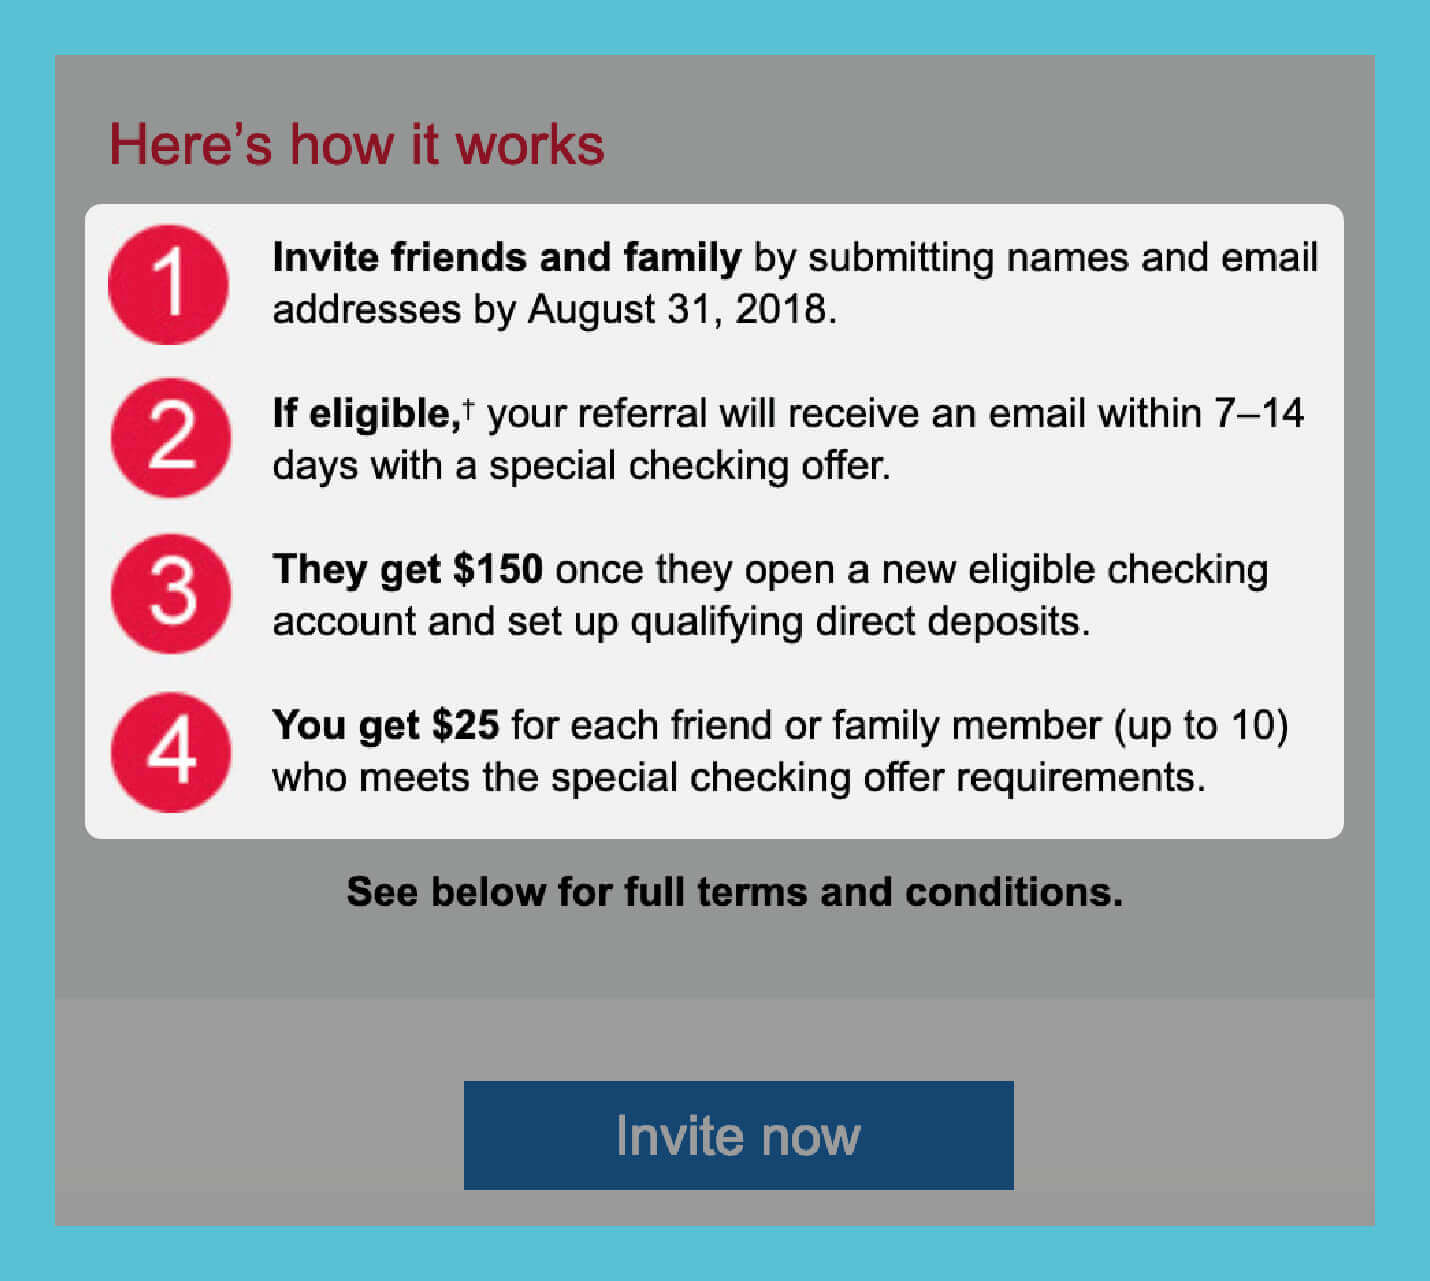 referral email outline the steps of referring new users from bank of america